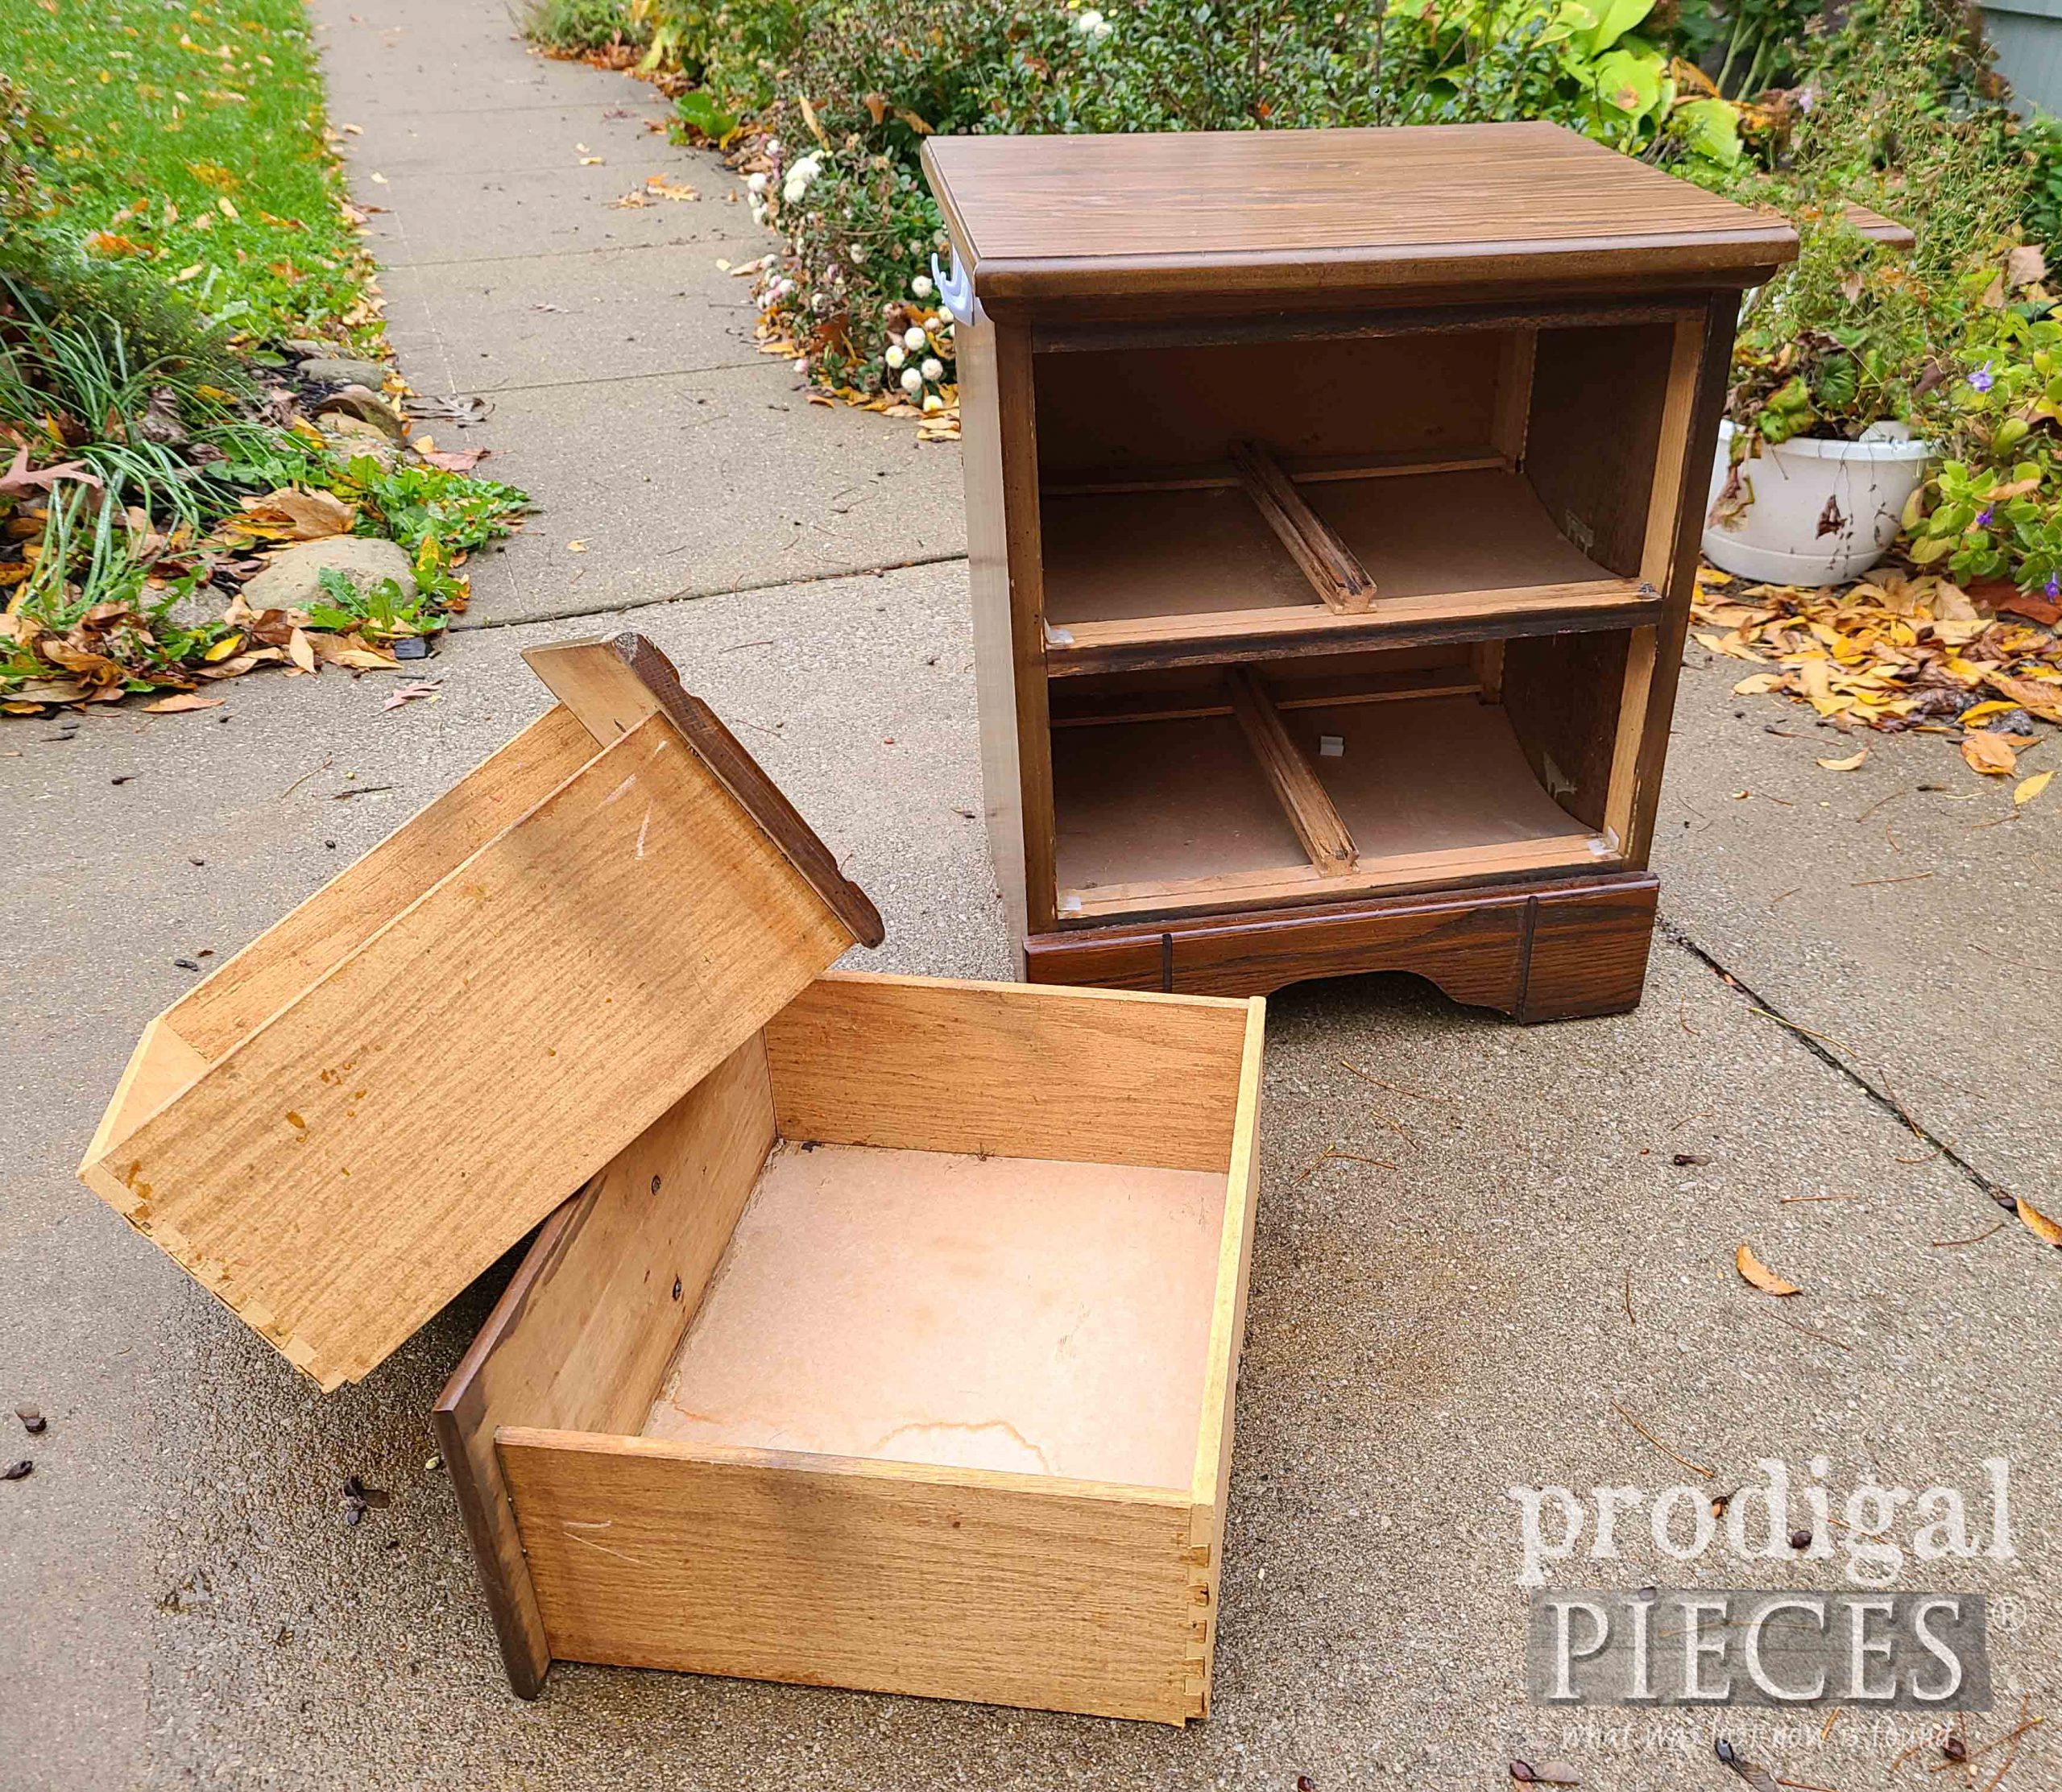 Vintage Nightstand Found Curbside by Larissa of Prodigal Pieces | prodigalpieces.com #prodigalpieces